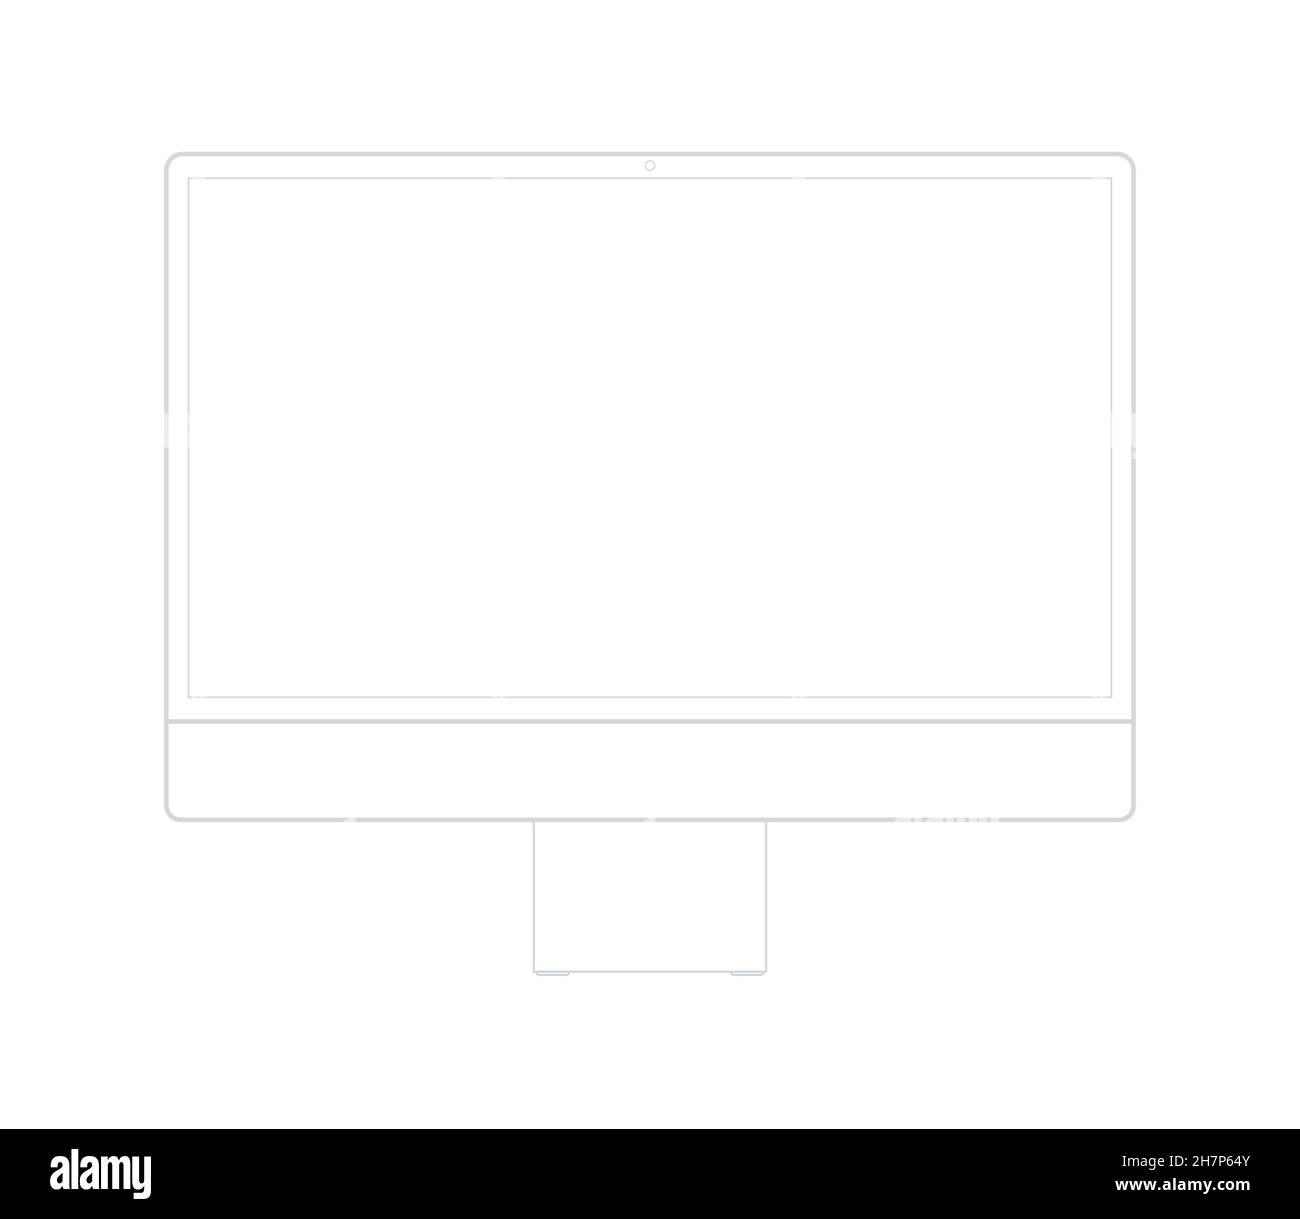 Imac computer outlined. Imac pc symbol similar vector illustration design. Outline all in one computer mockup on white background. Stock Vector